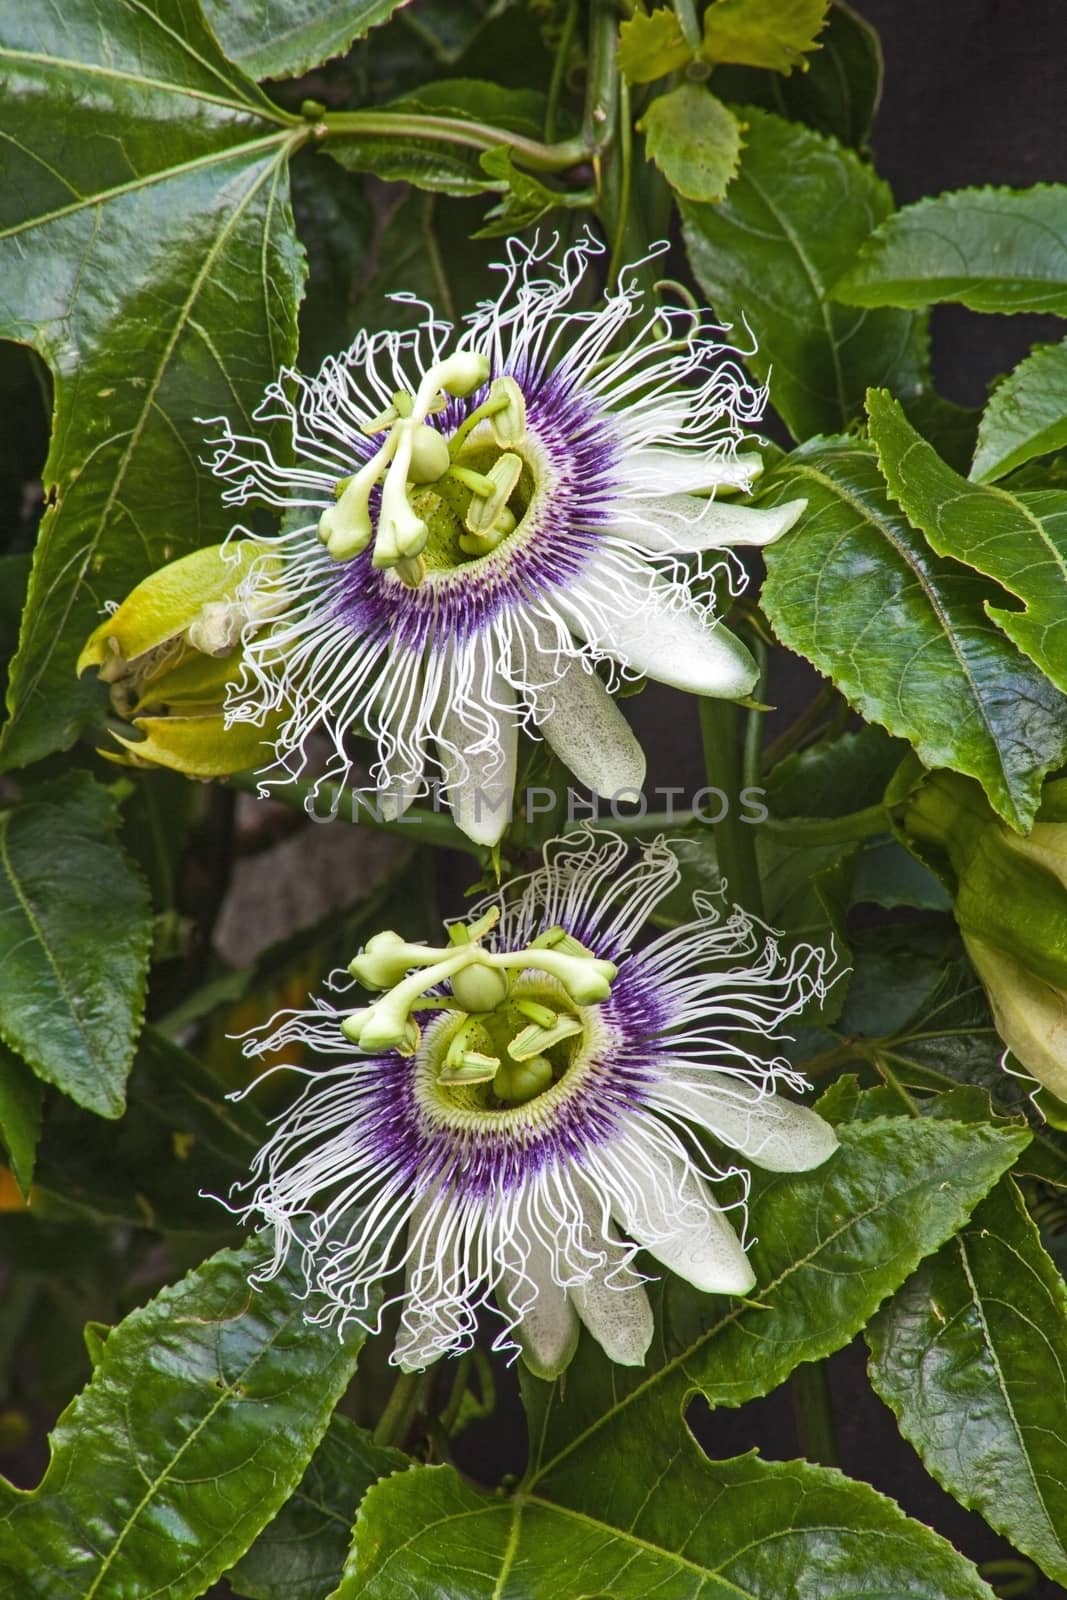 Passion-fruit Flowers by kobus_peche